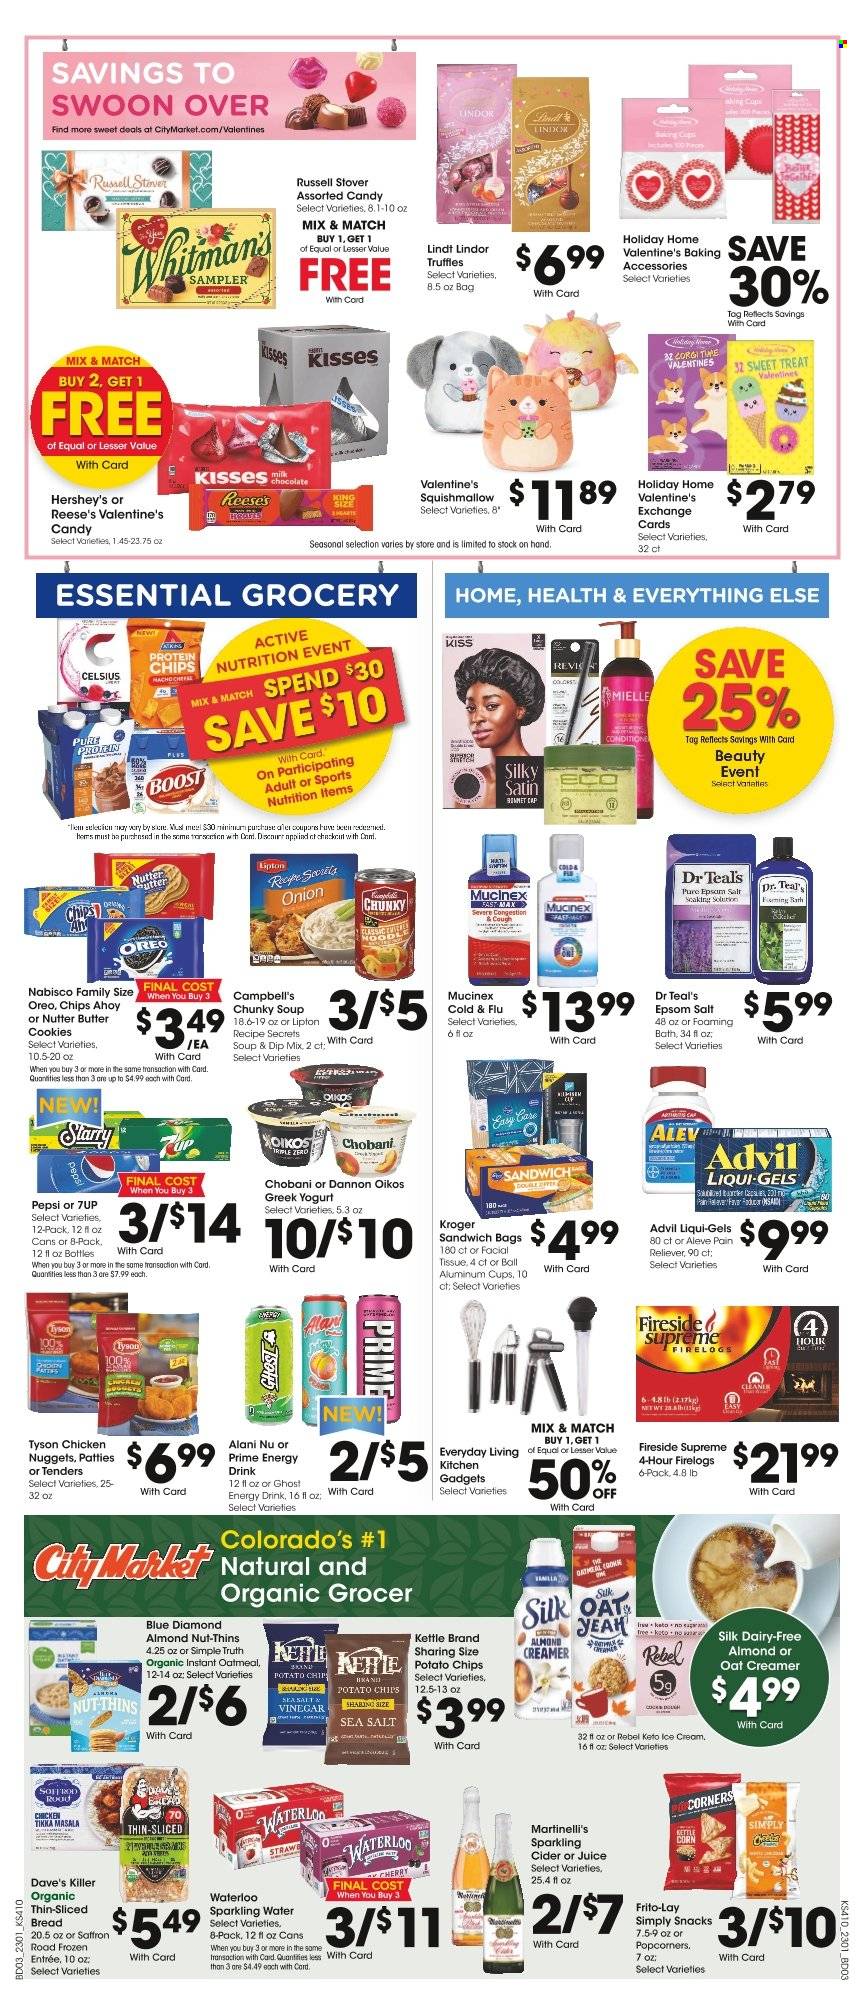 thumbnail - City Market Flyer - 02/01/2023 - 02/07/2023 - Sales products - bread, corn, cherries, Campbell's, soup, nuggets, chicken nuggets, noodles, Tikka Masala, cheese, greek yoghurt, Oreo, yoghurt, Oikos, Chobani, Dannon, Silk, creamer, almond creamer, ice cream, Reese's, Hershey's, Enlightened lce Cream, cookies, butter cookies, snack, Lindt, Lindor, truffles, potato chips, Thins, popcorn, Frito-Lay, oatmeal, Blue Diamond, Pepsi, juice, energy drink, Lipton, 7UP, sparkling water, Boost, sparkling cider, sparkling wine, cider, tissues, Mielle, cup, Squishmallows, Aleve, Cold & Flu, Mucinex, Advil Rapid. Page 5.